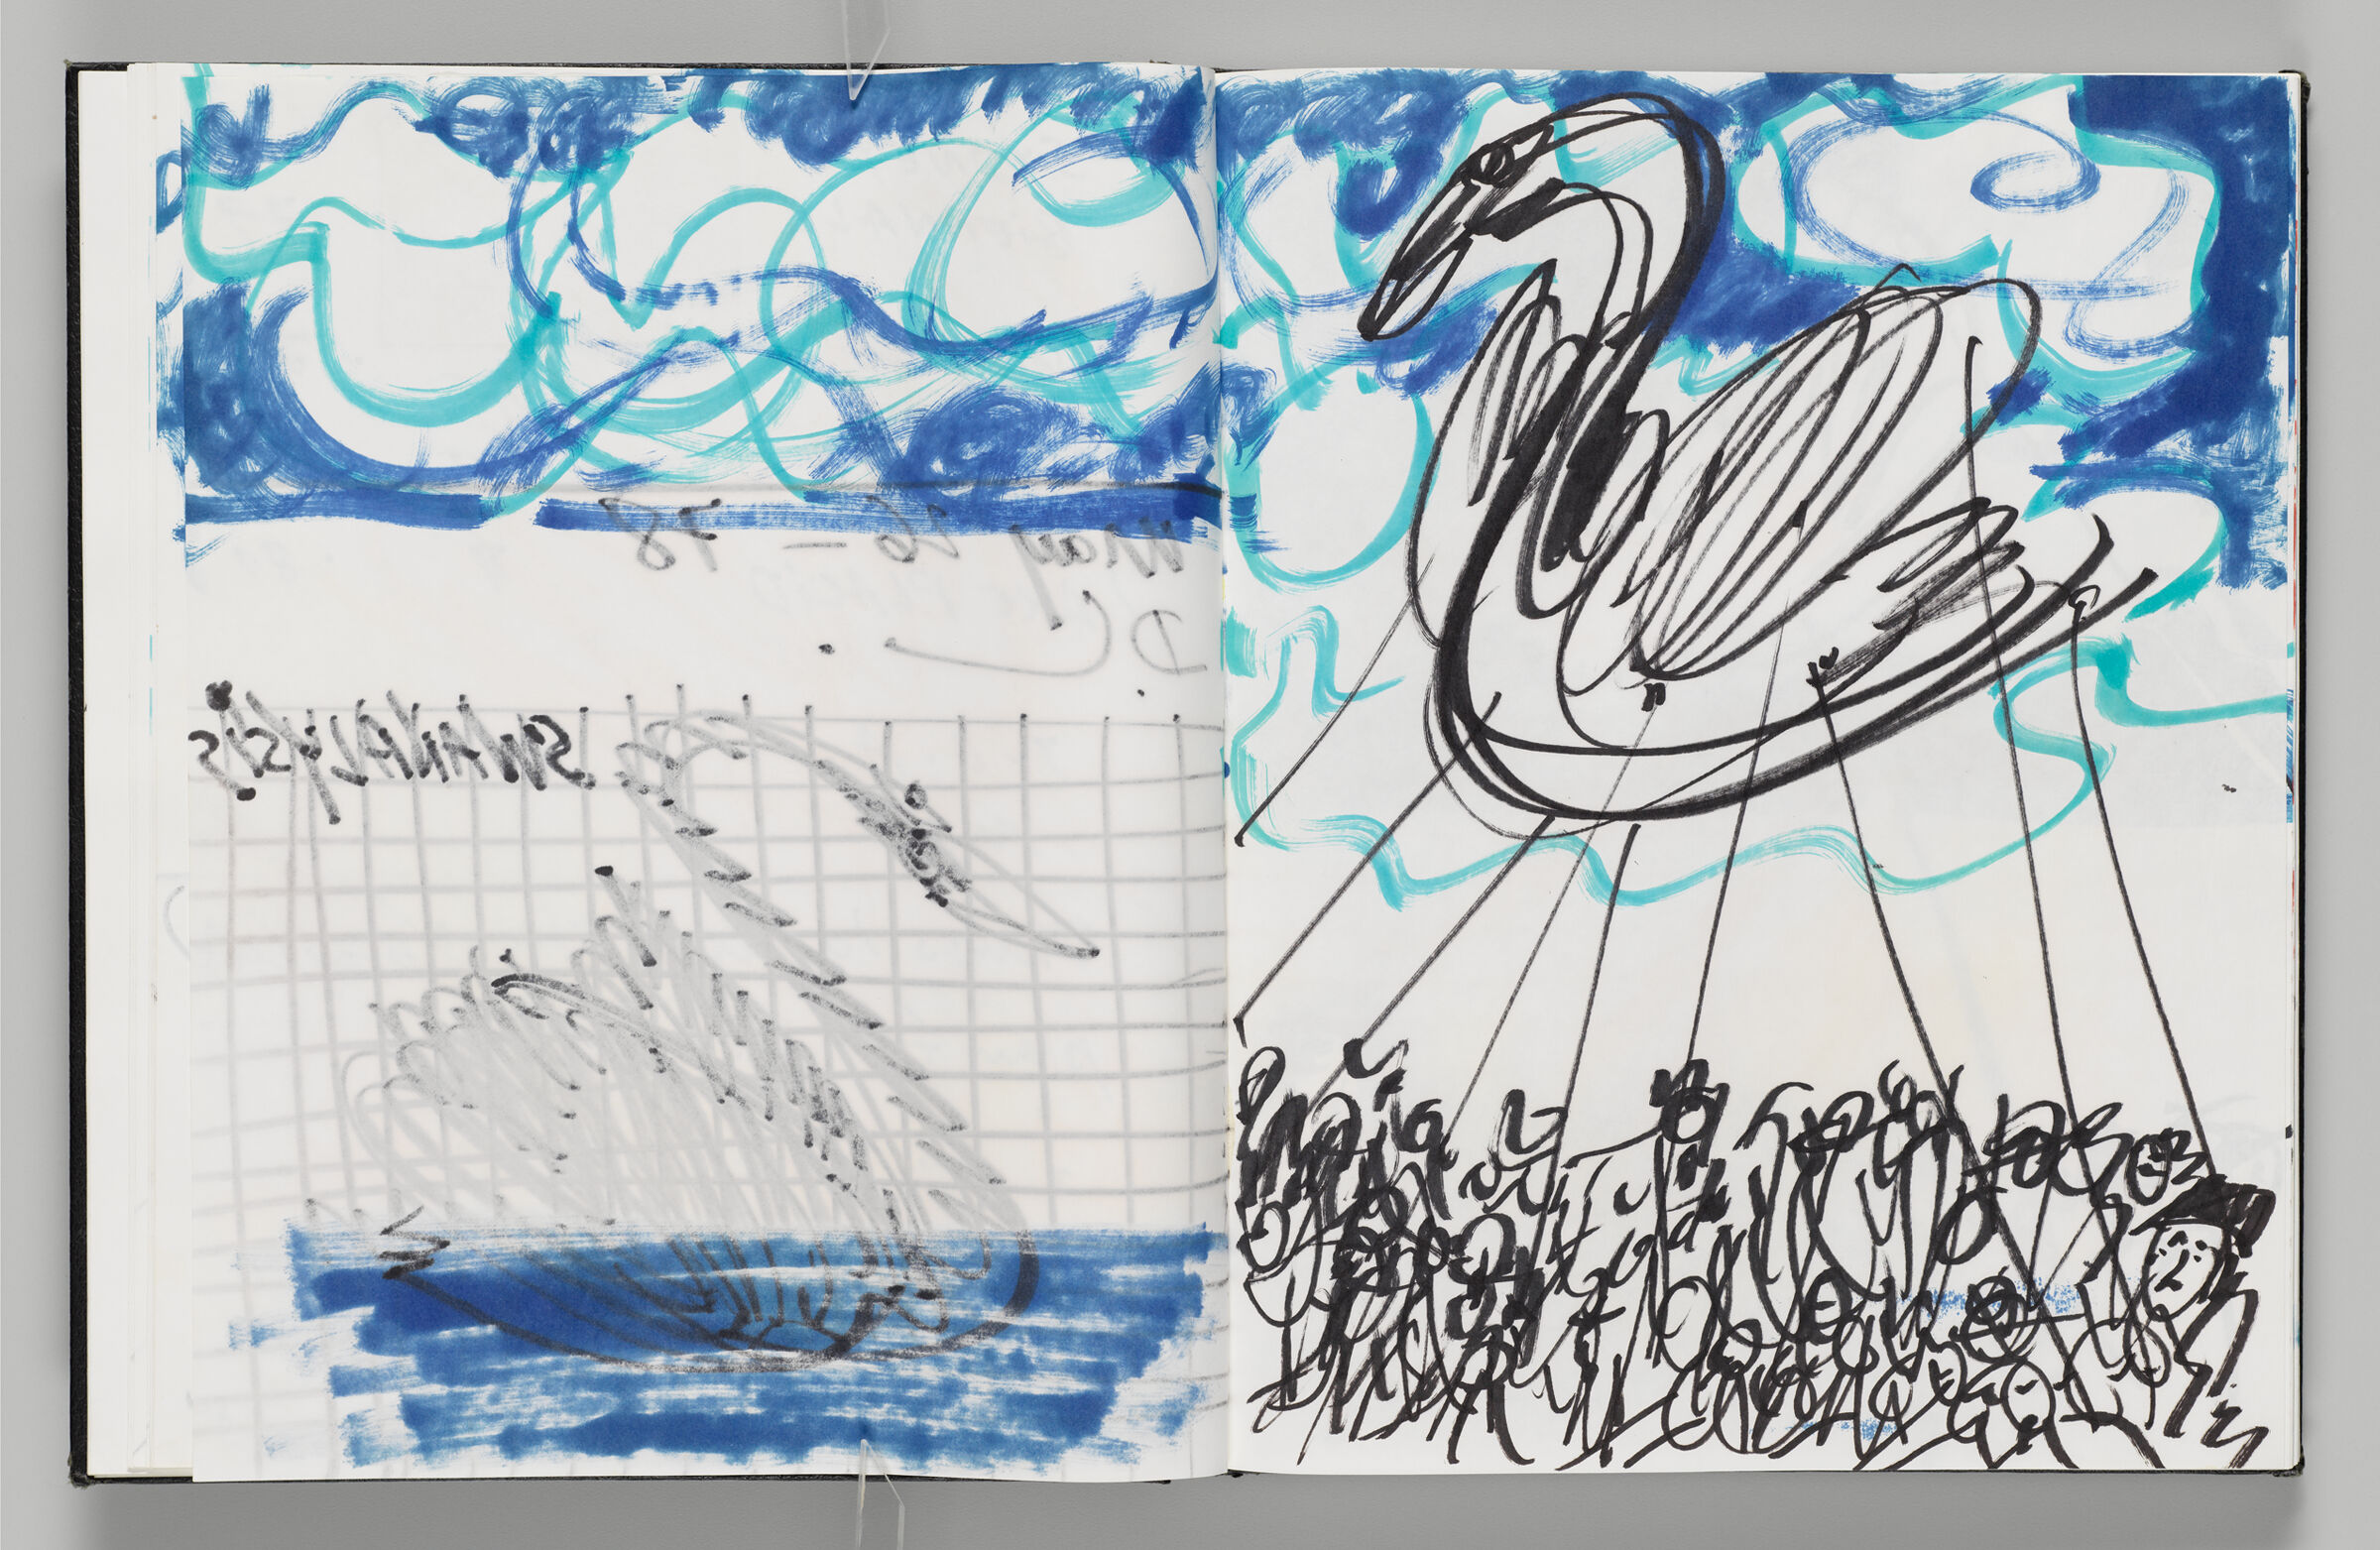 Untitled (Bleed-Through Of Previous Page And Swan Inflatable With Crowd, Two-Page Spread)